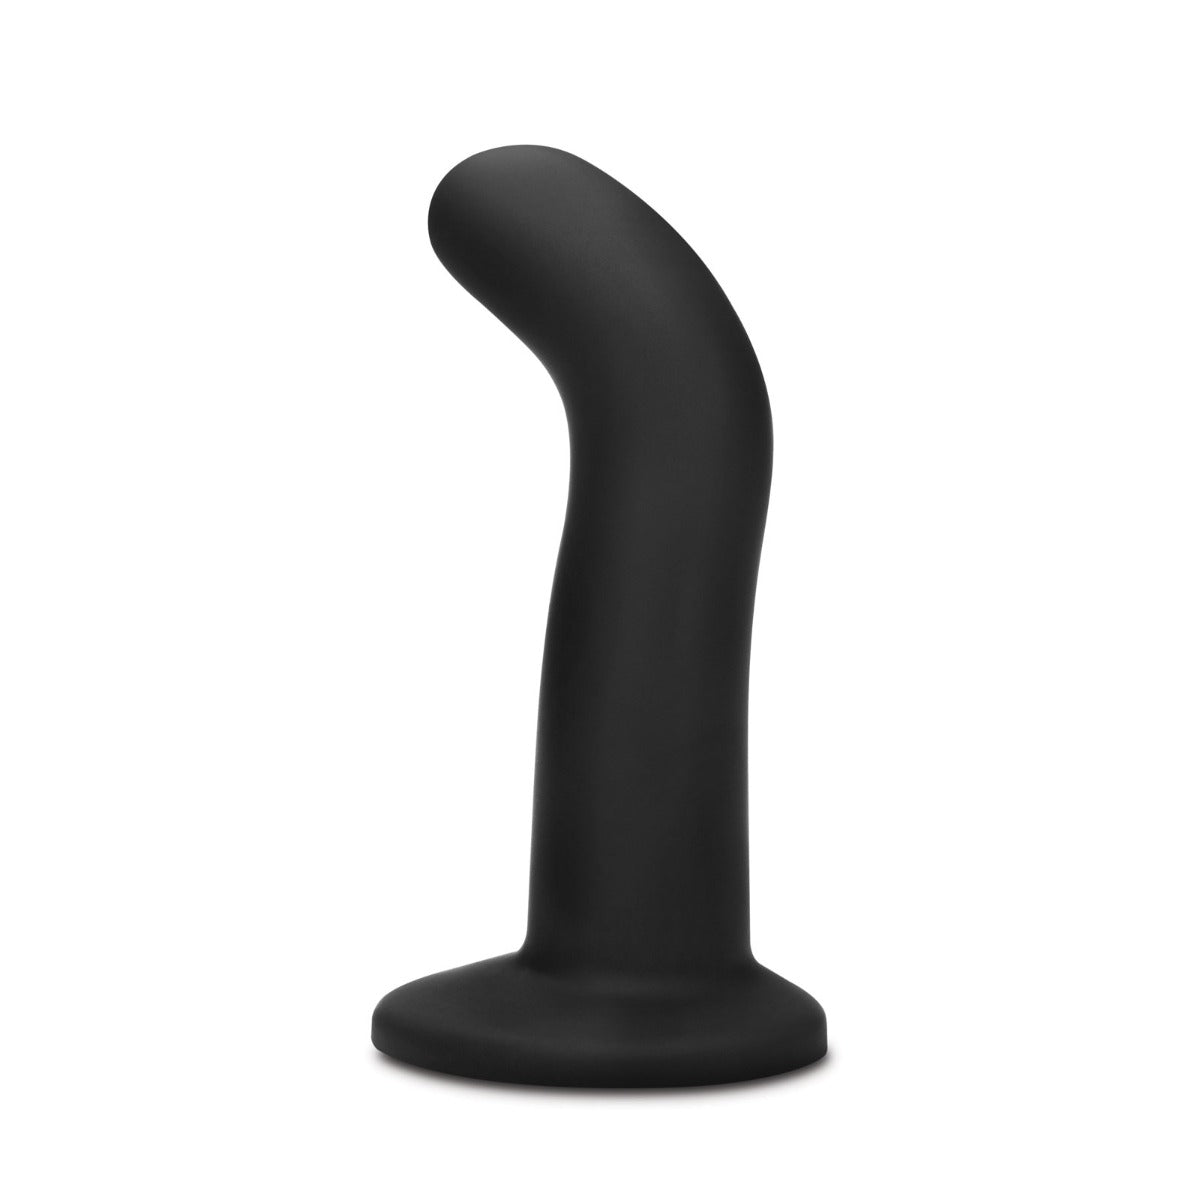 Suction Base Dildos Whipsmart 5.5 inches Remote Control Vibrating Dildo - Black   